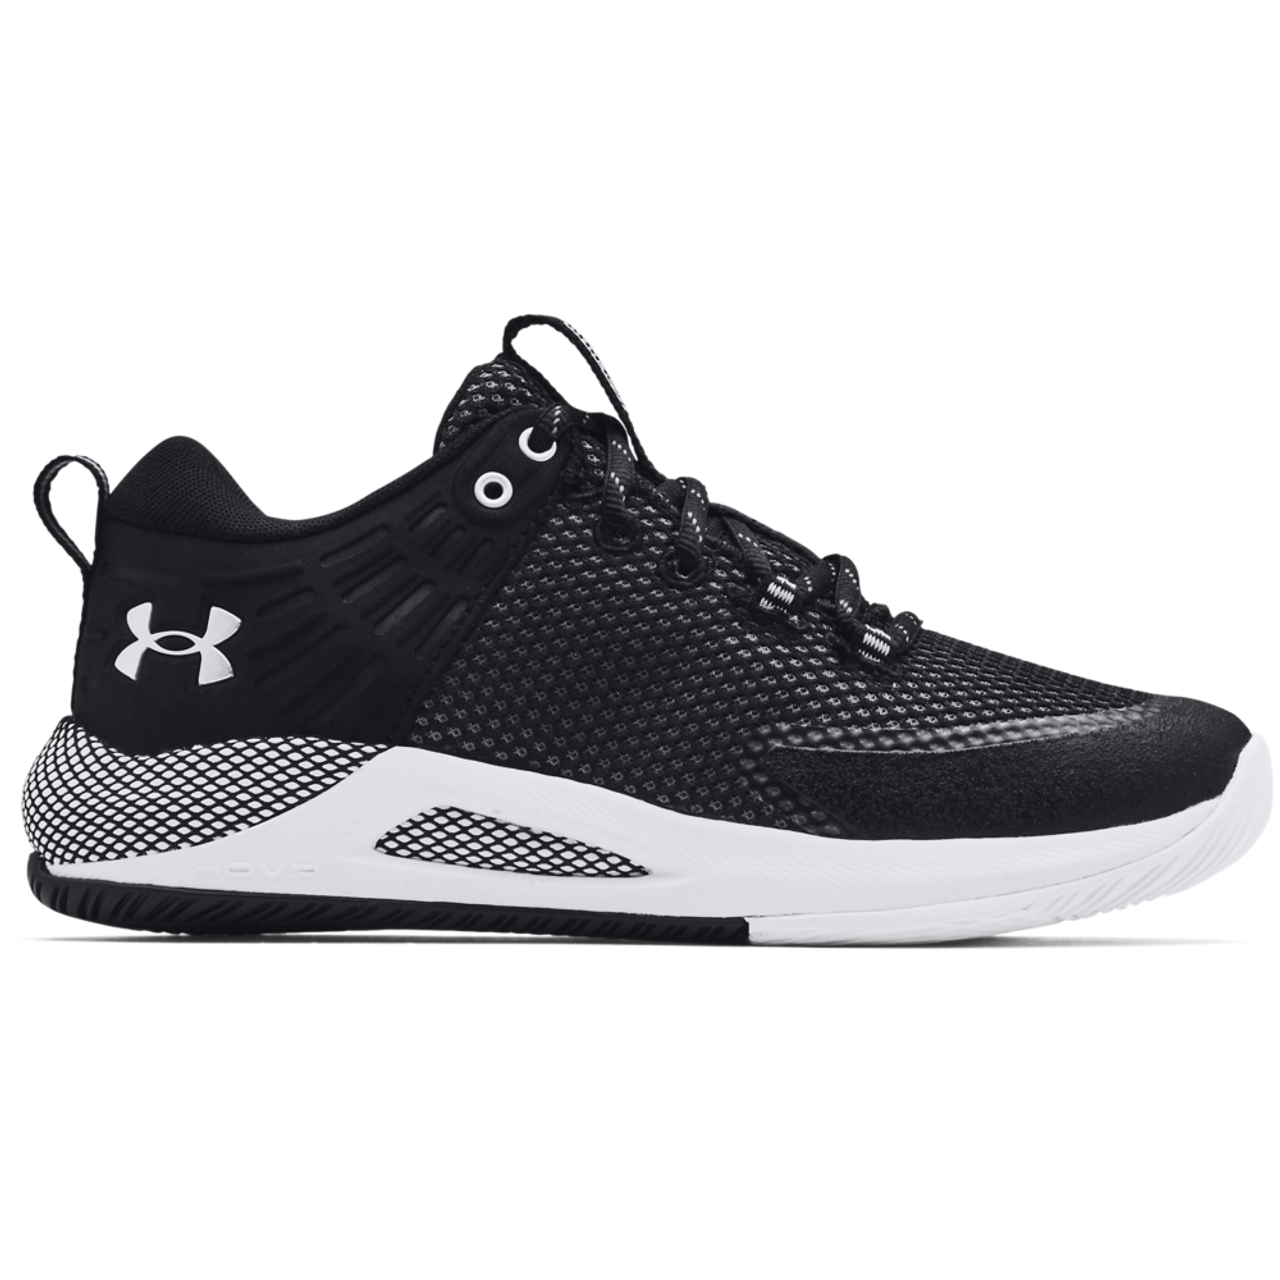 Under Armour HOVR Block City | RealVolleyball